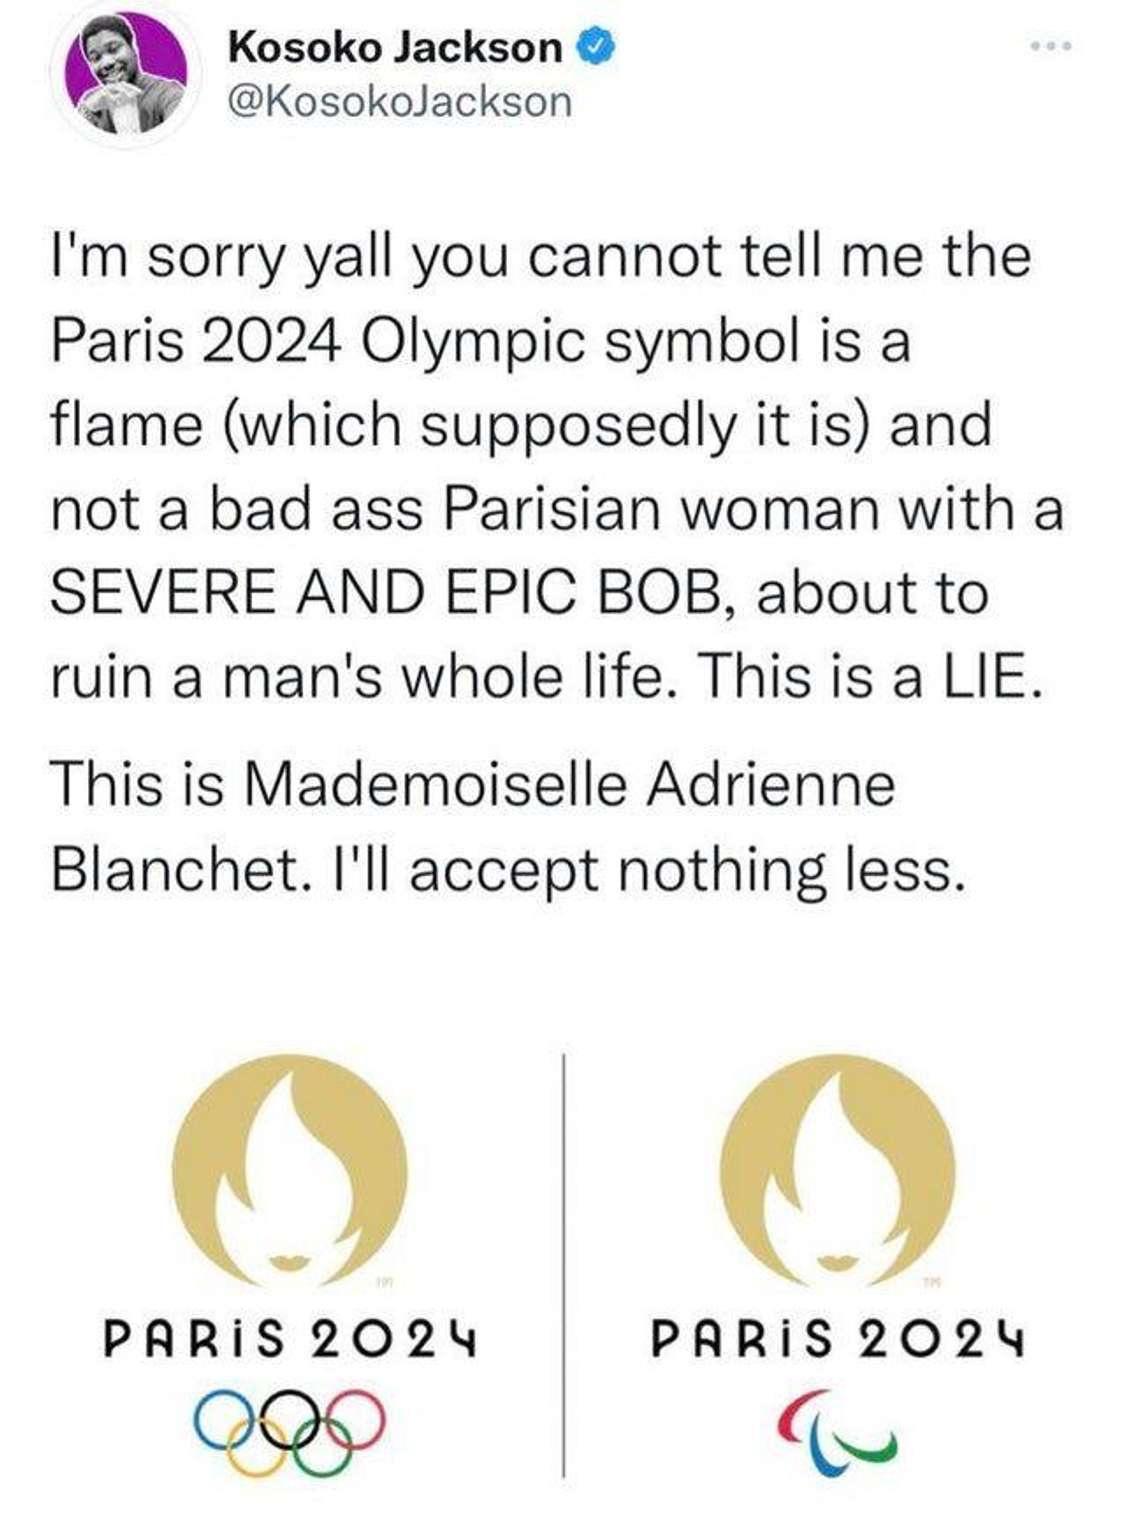 funny memes - funny pictures - adrienne blanchet - Kosoko Jackson I'm sorry yall you cannot tell me the Paris 2024 Olympic symbol is a flame which supposedly it is and not a bad ass Parisian woman with a Severe And Epic Bob, about to ruin a man's whole li